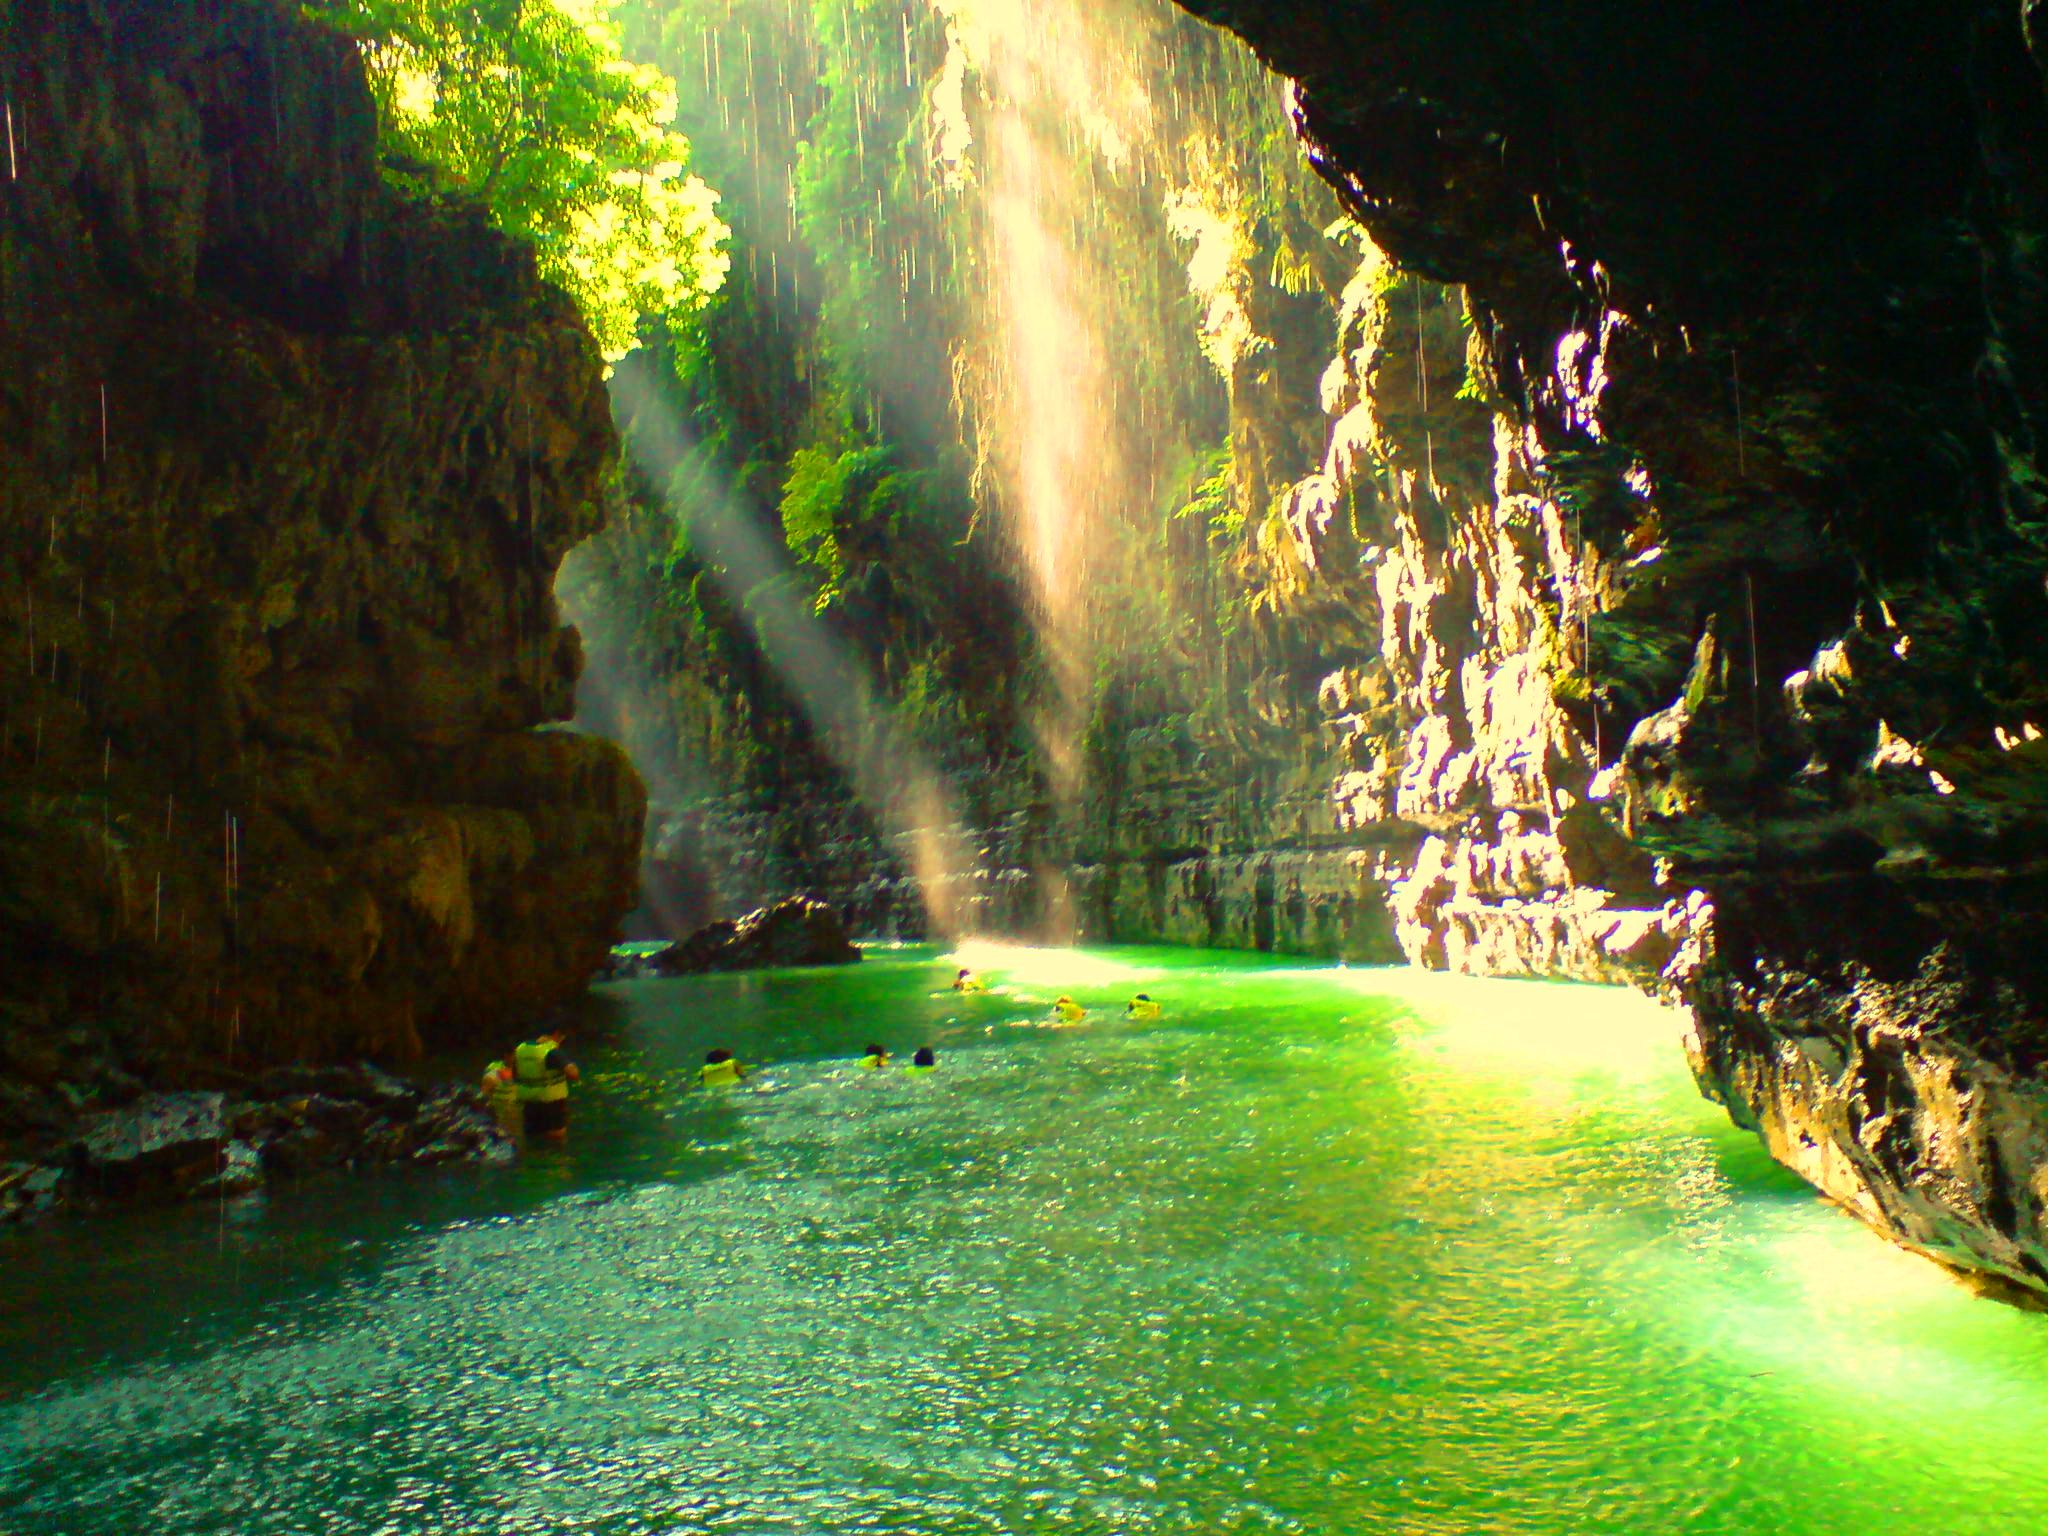 Green Canyon in West Java, Indonesia